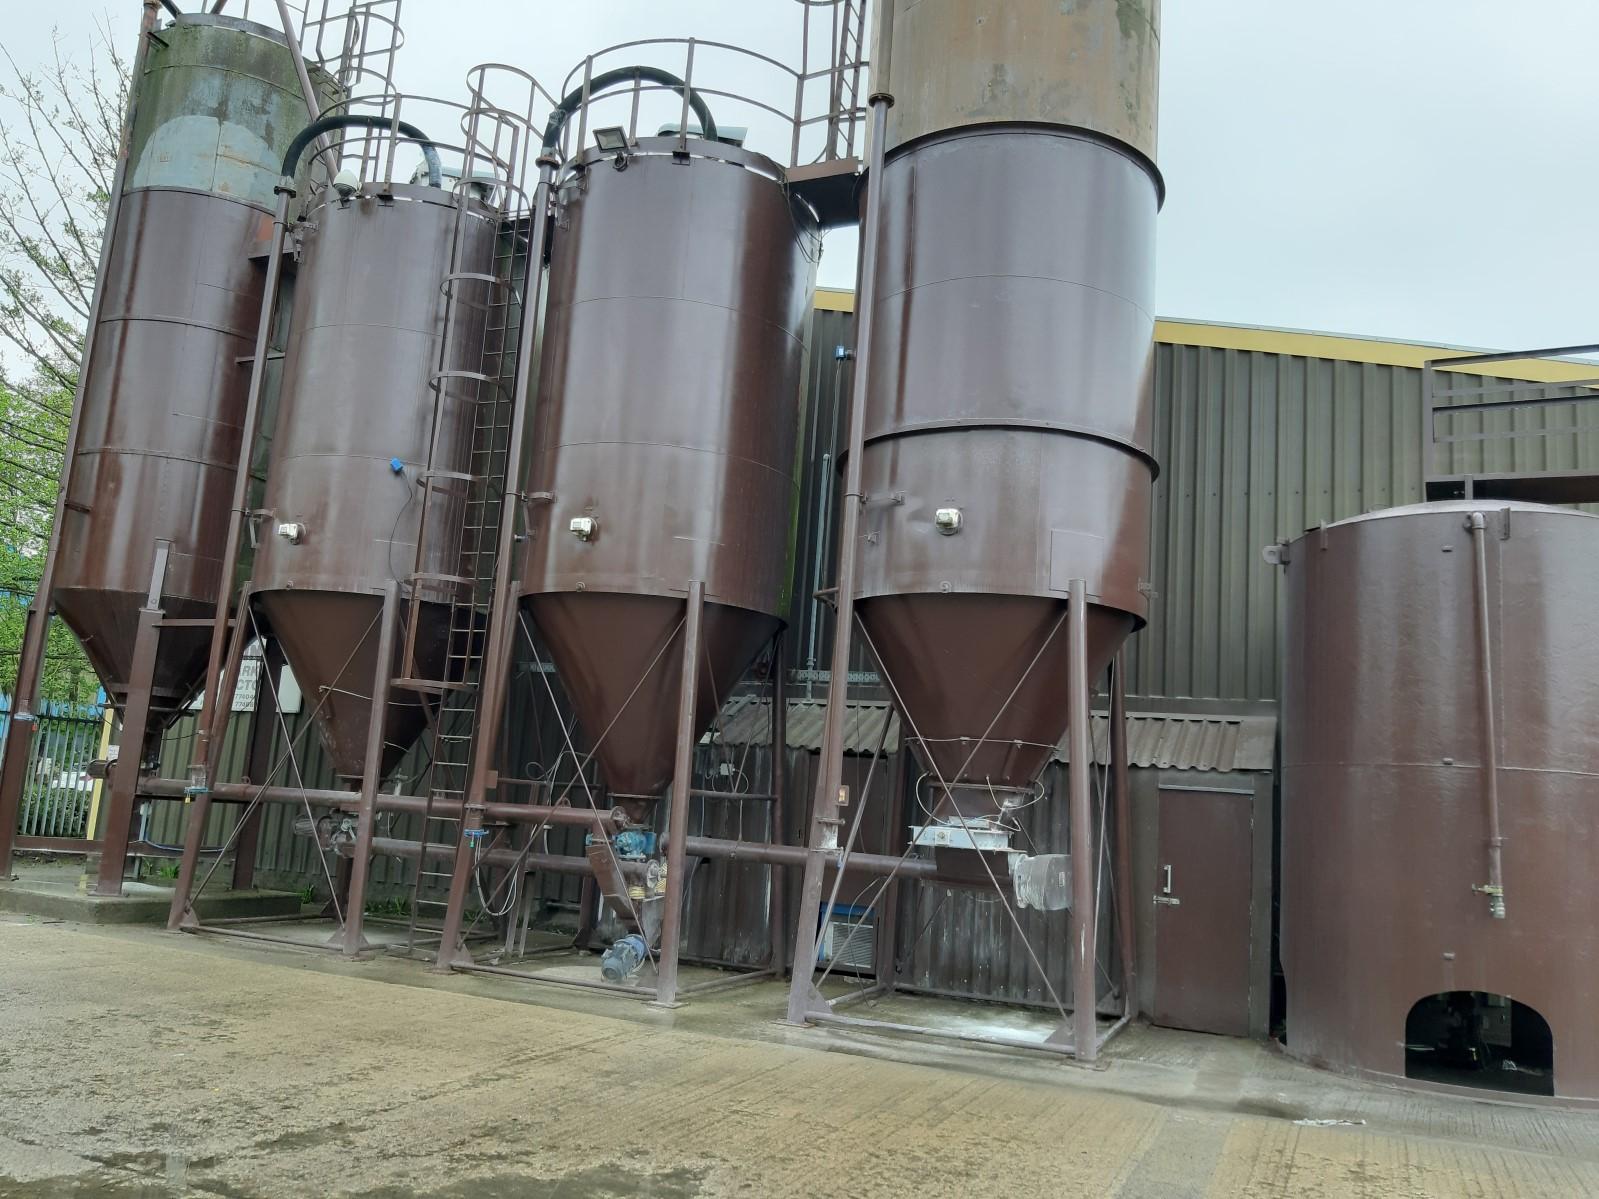 Industrial storage silos valued as part of an ongoing process/manufacturing business.